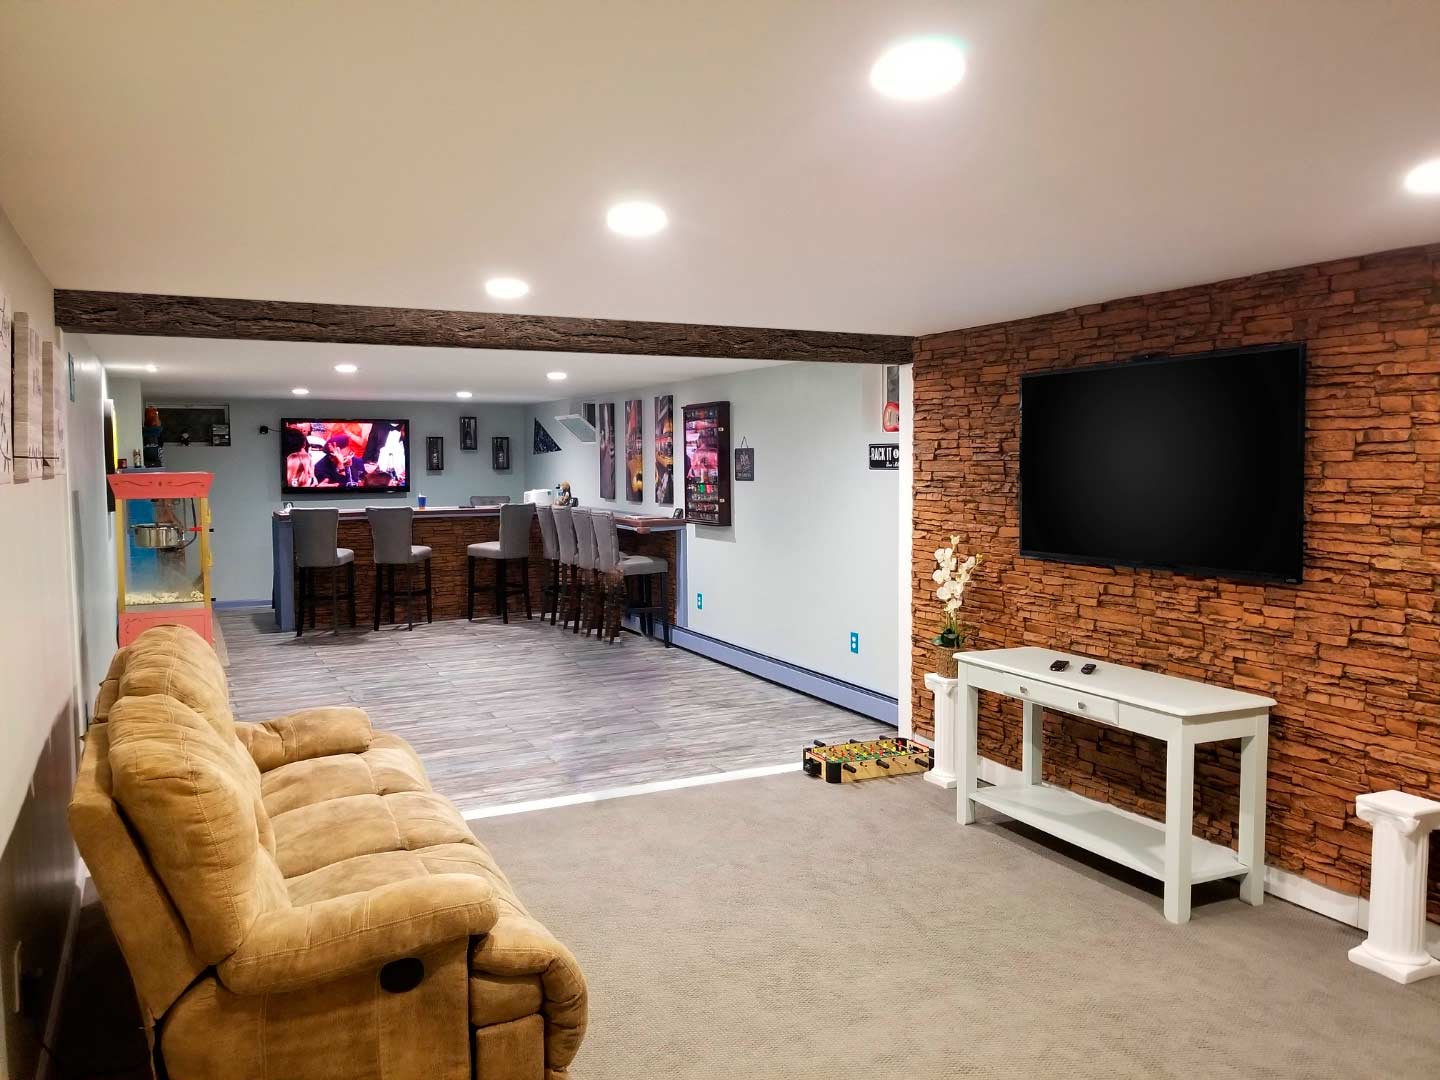 installing faux panels on a concrete basement wall creates a sophisticated focal wall to mount a TV